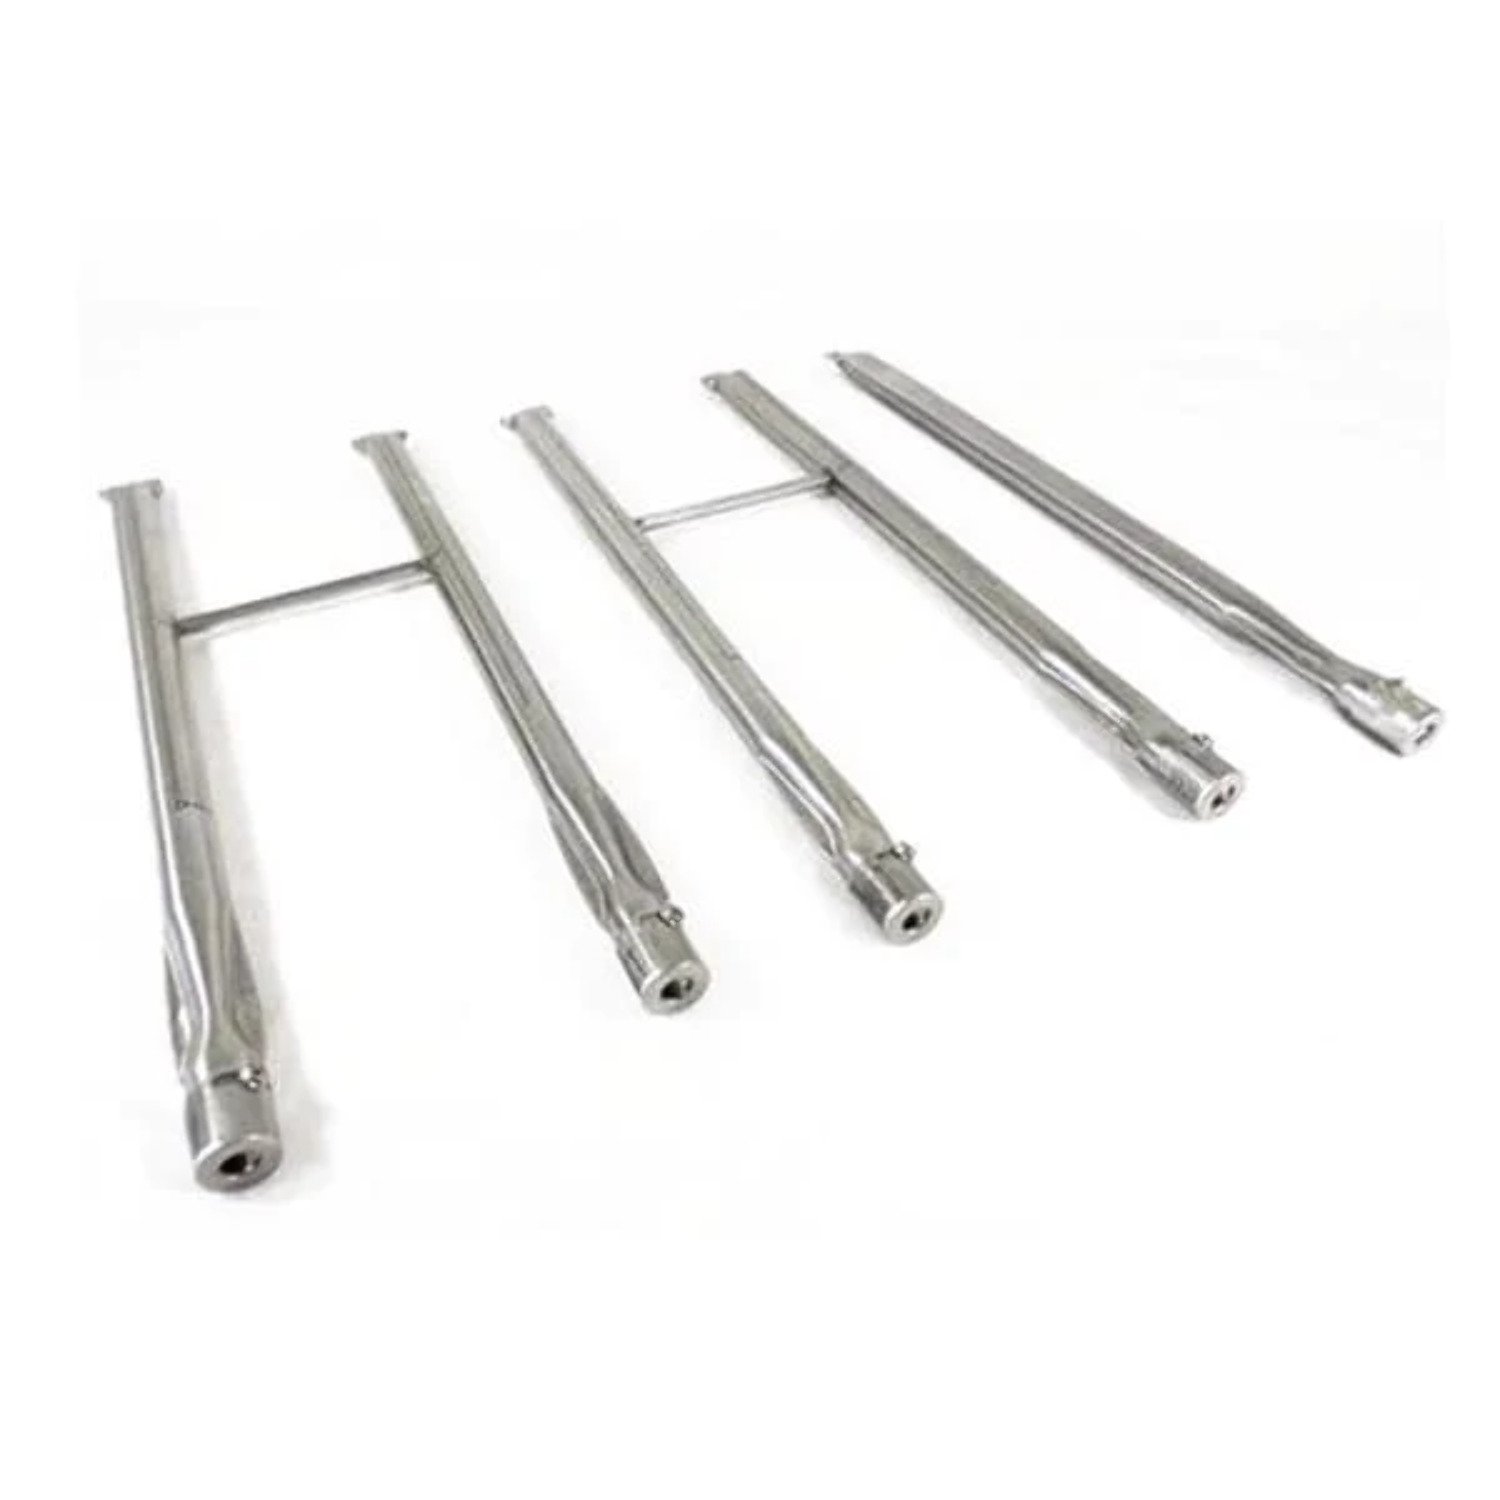 BBQ Grill Compatible With Weber Grills 5-Pack SS Burner  Smoker Set (Plus 2 Crossover Burner Tubes) BCP85661 - image 2 of 4